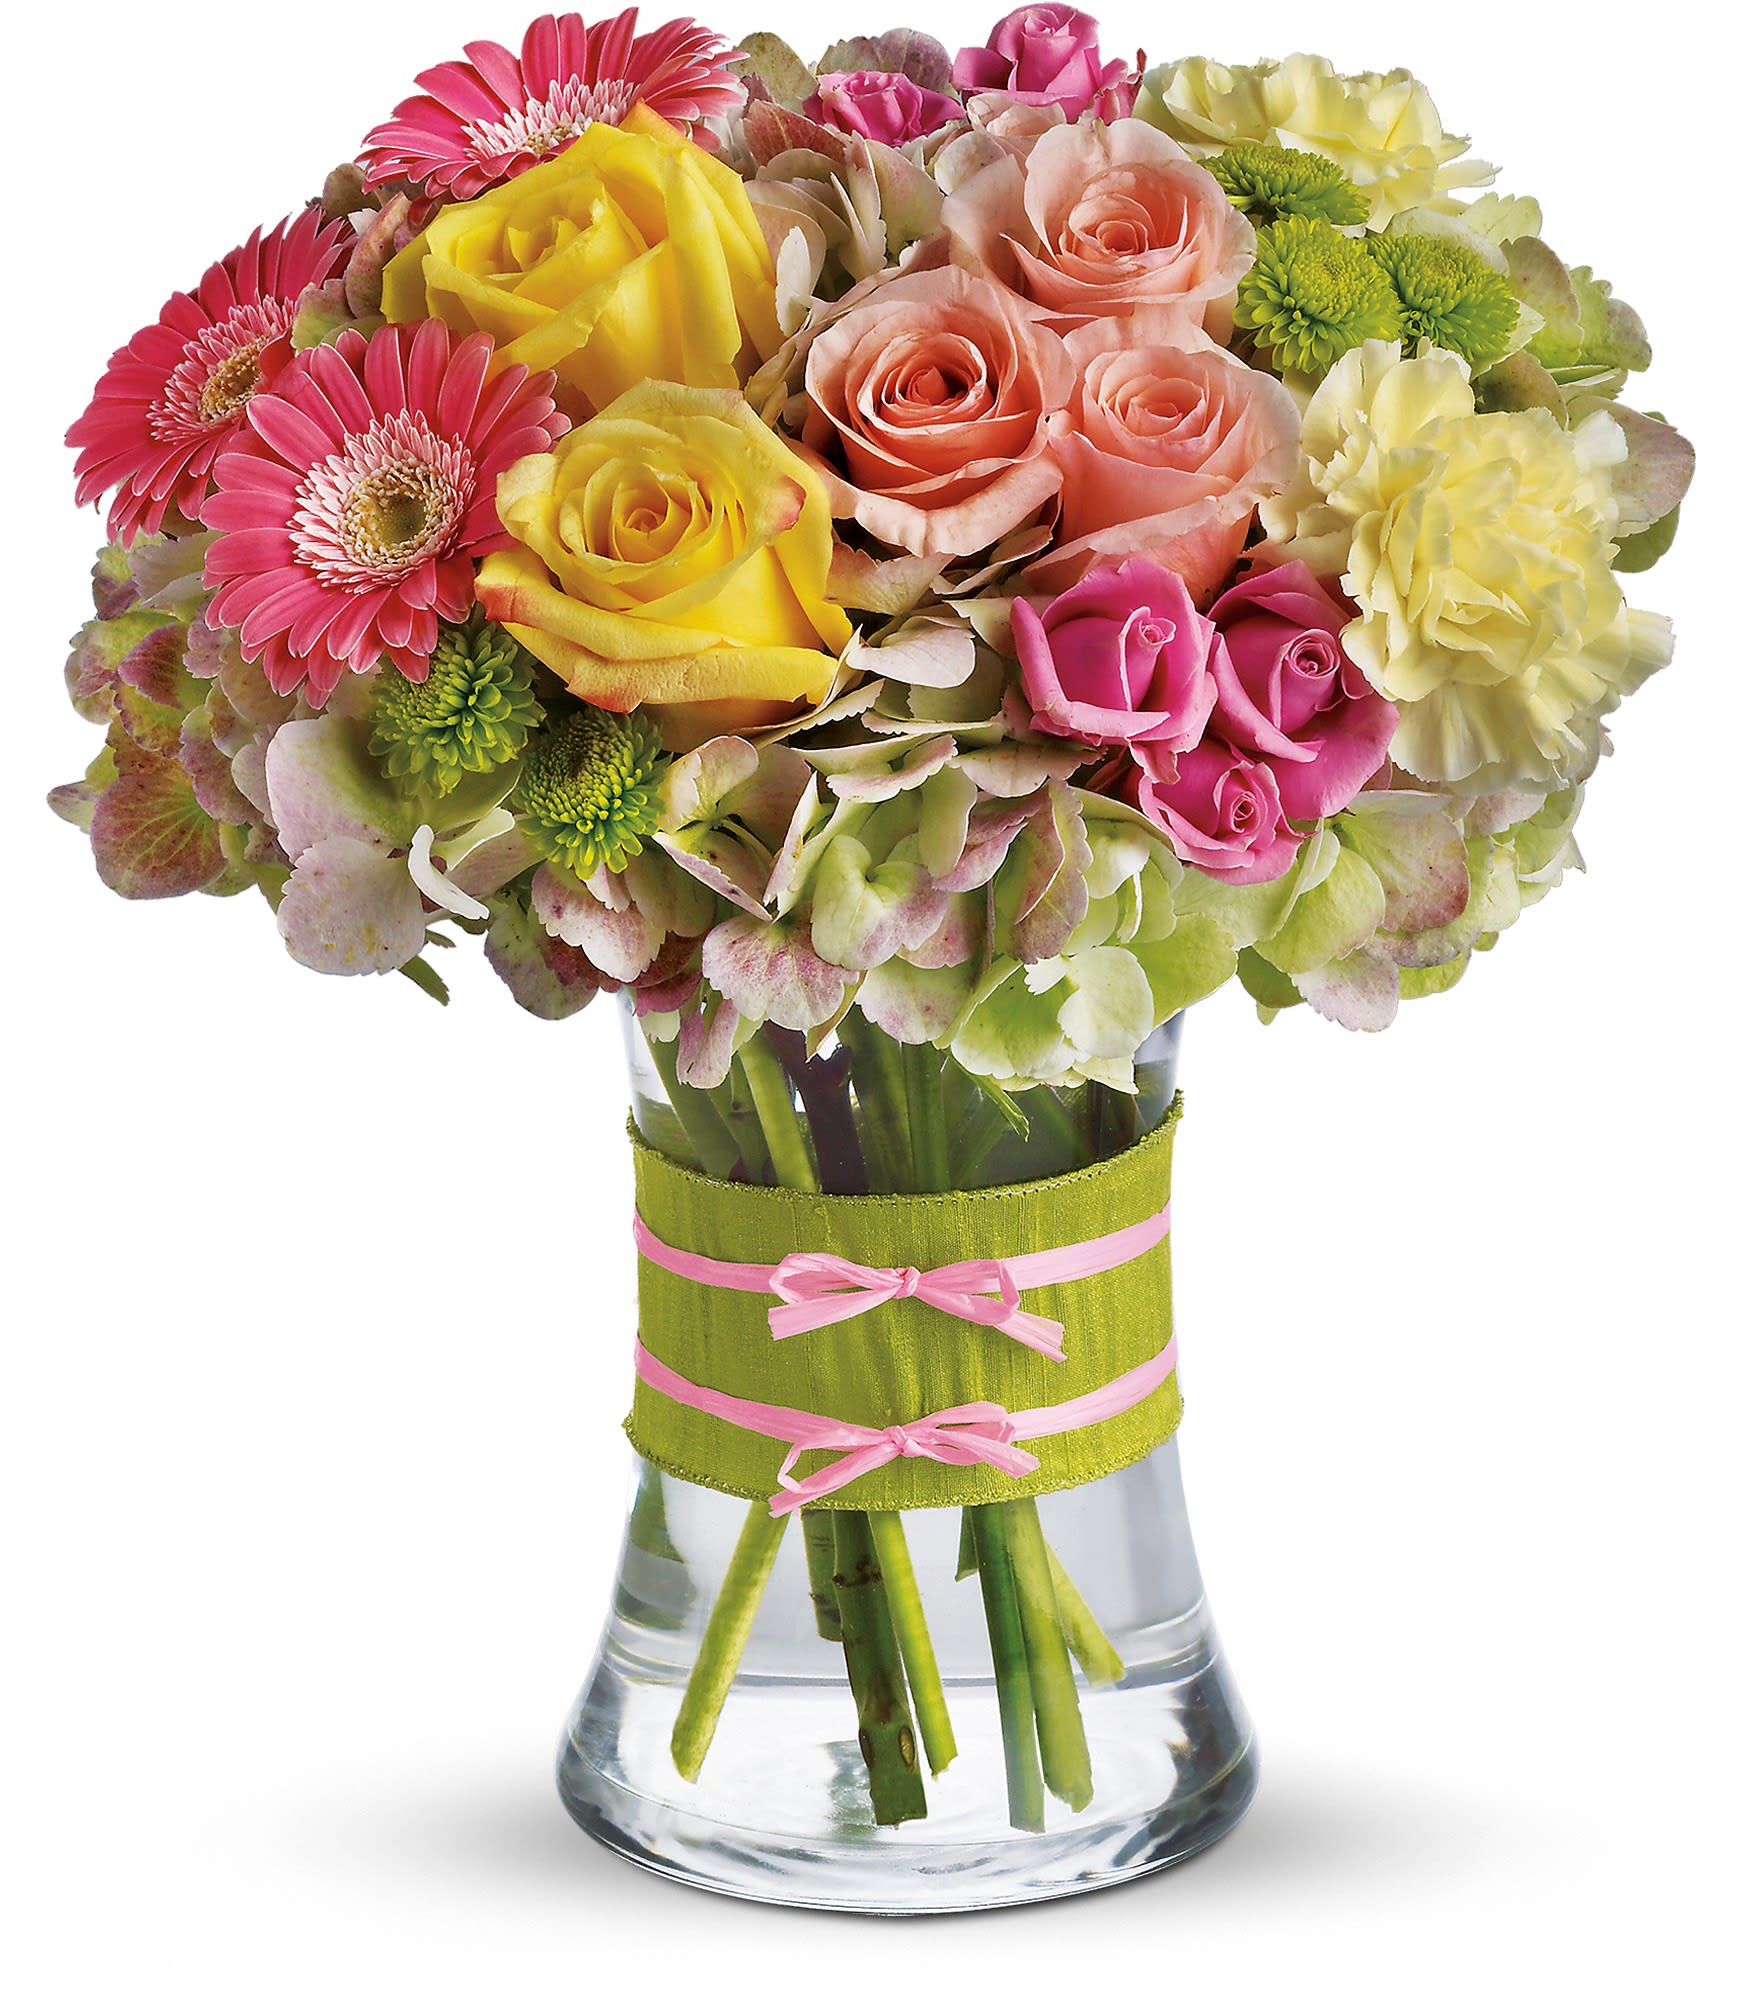 Fashionista Blooms - This arrangement would be perfect for any girl with an eye for style. It's a must-have for fashionistas everywhere. 